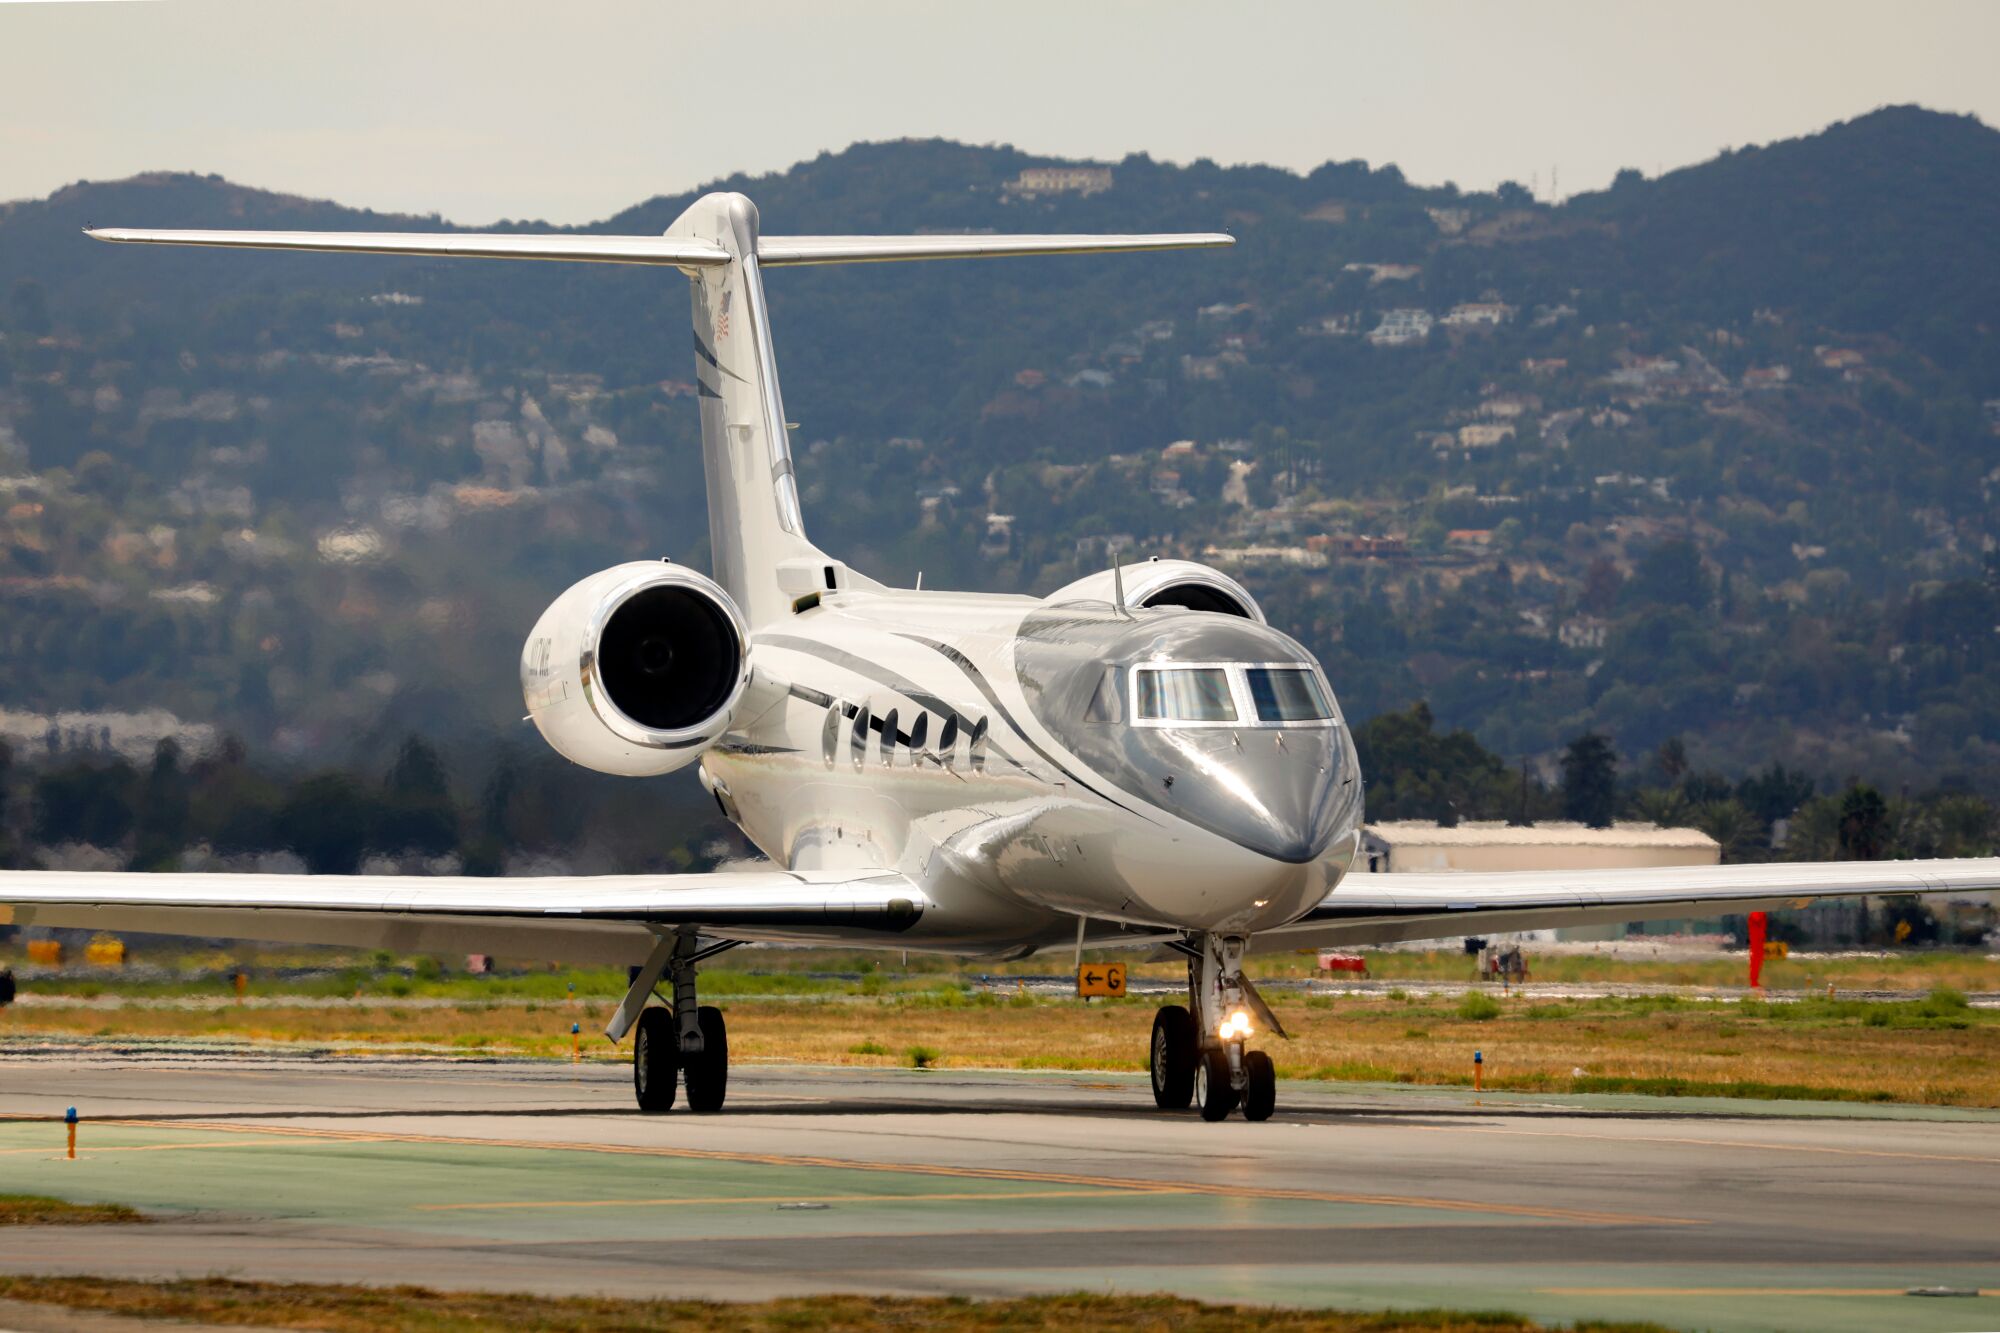 A jet taxis onto a runway at VNY in preparation for takeoff, within view of the Hollywood Hills.